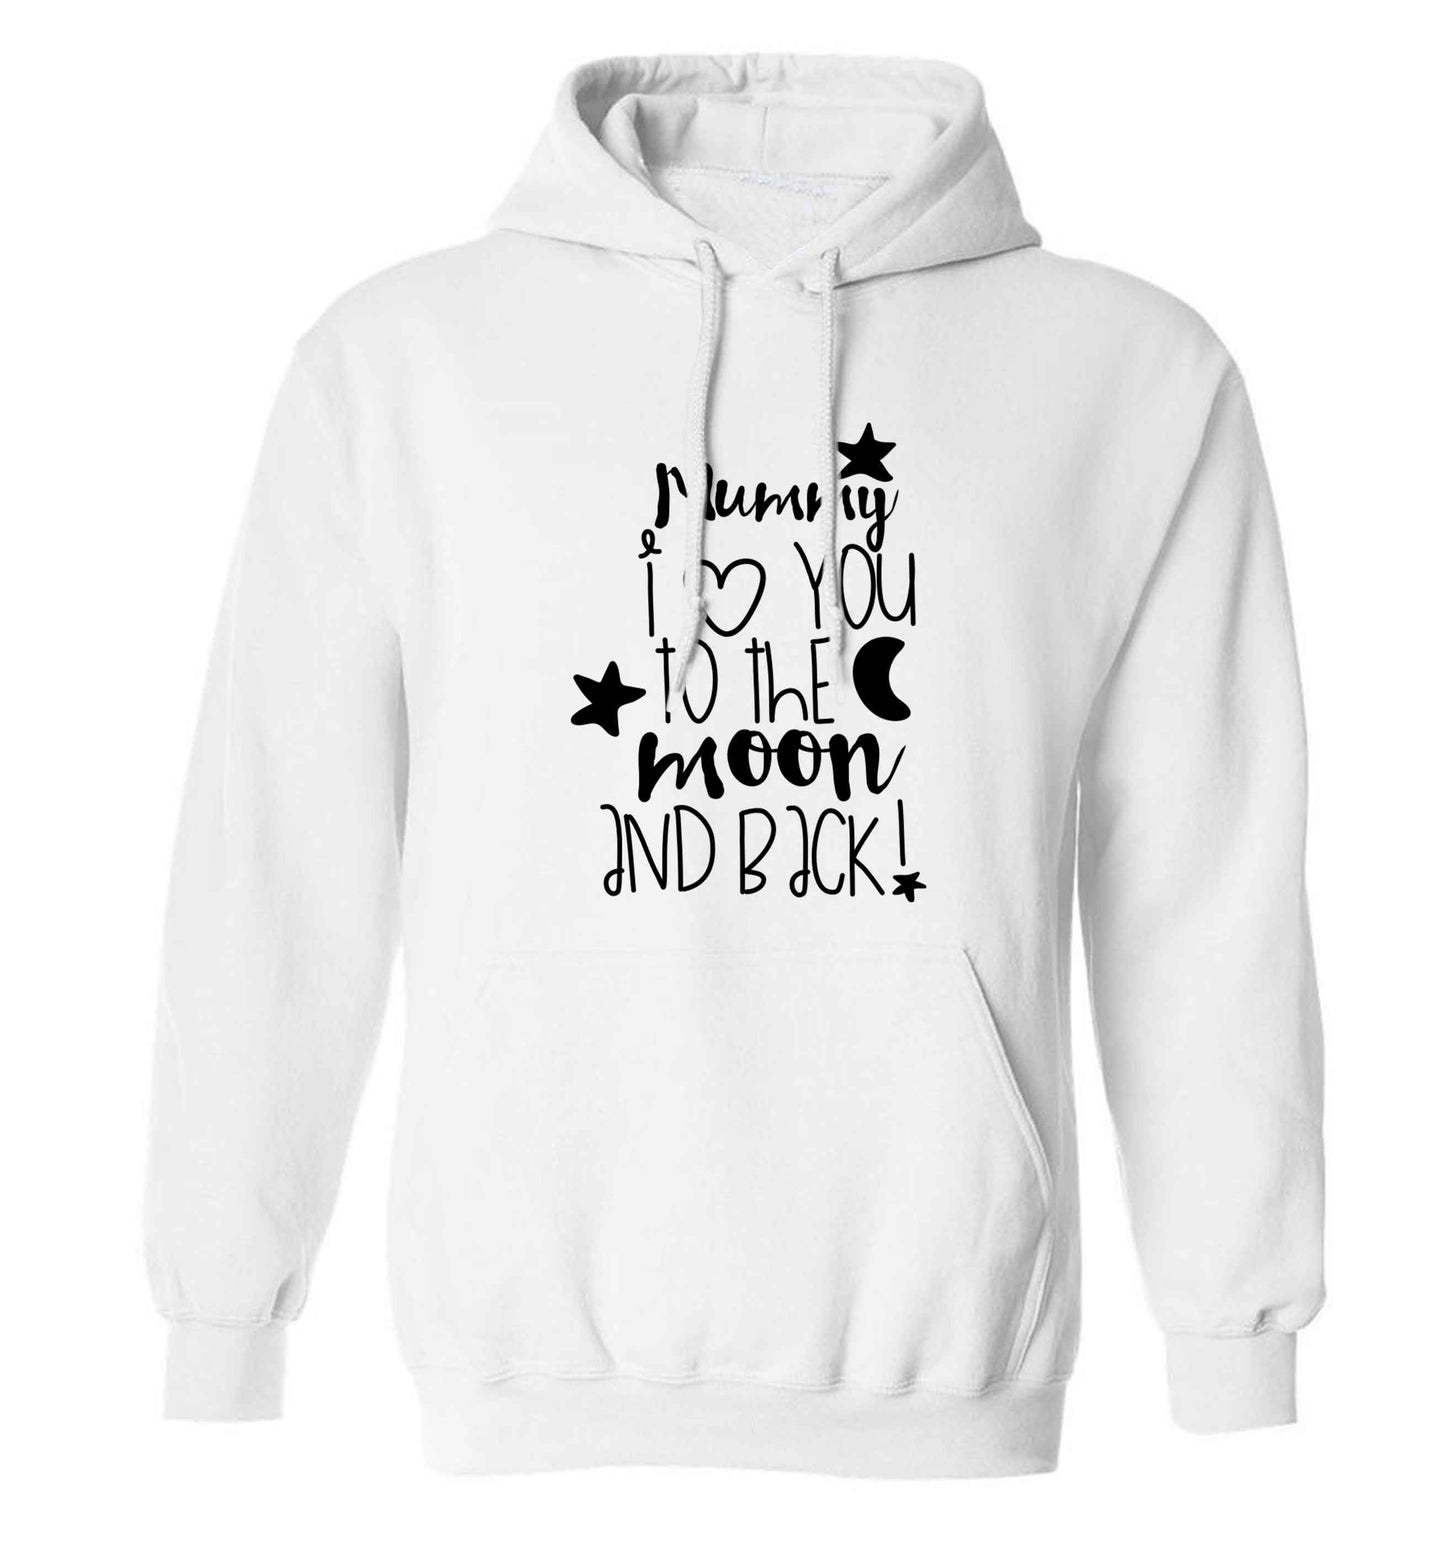 Mummy I love you to the moon and back adults unisex white hoodie 2XL